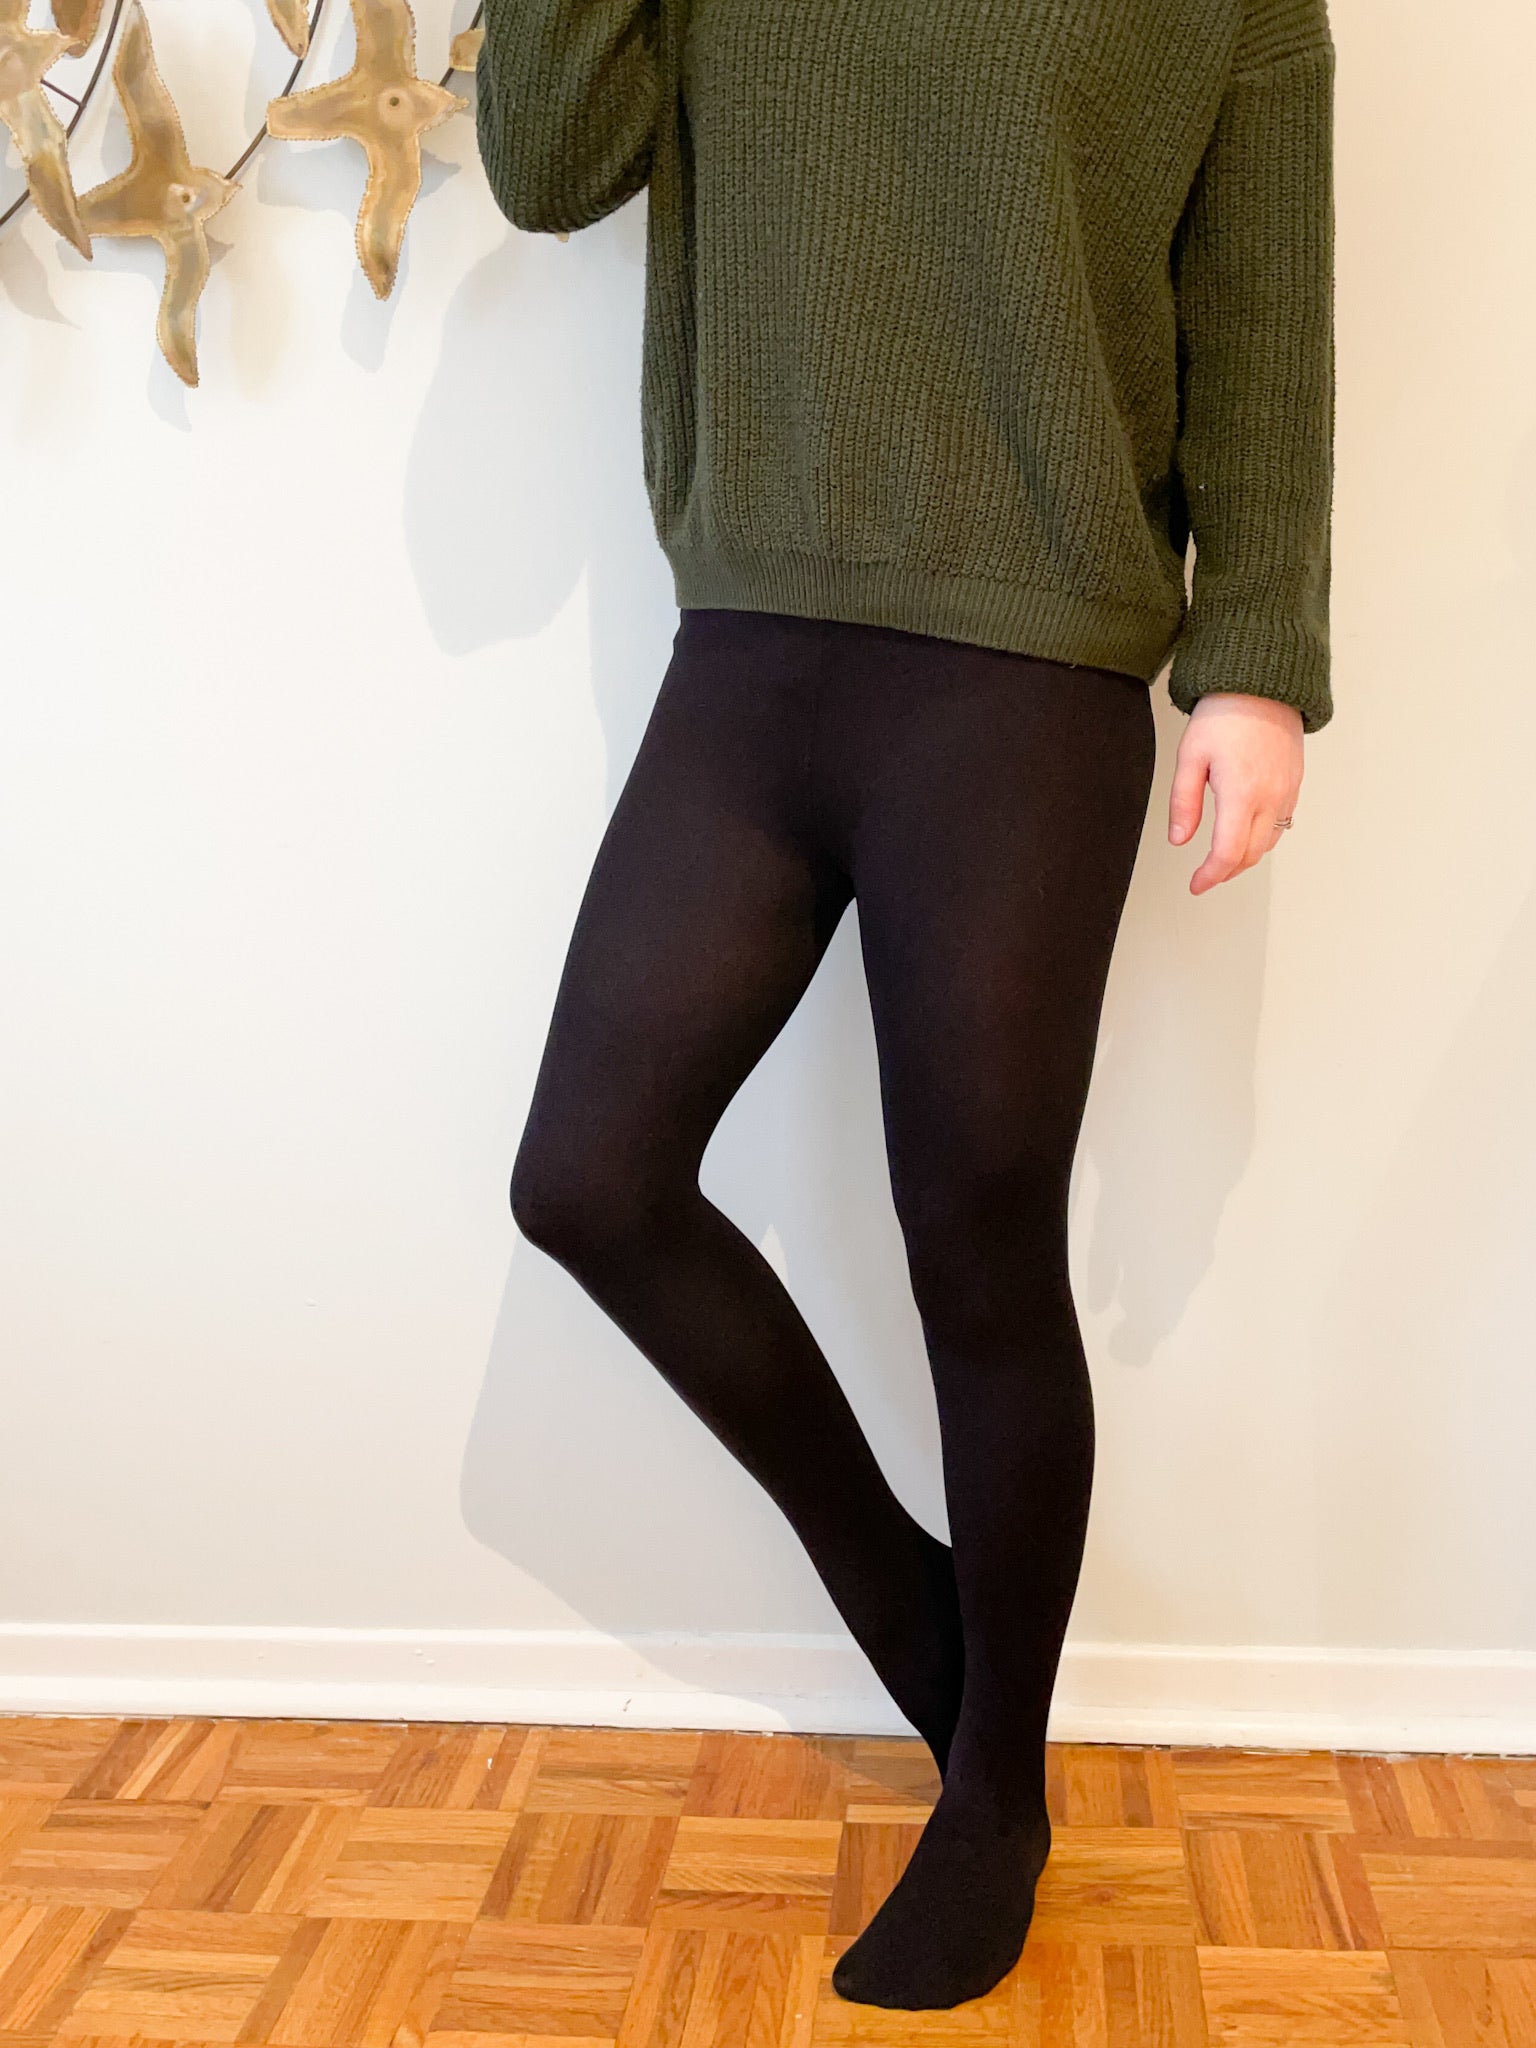 How to wash, fold, store, and care for tights and stockings